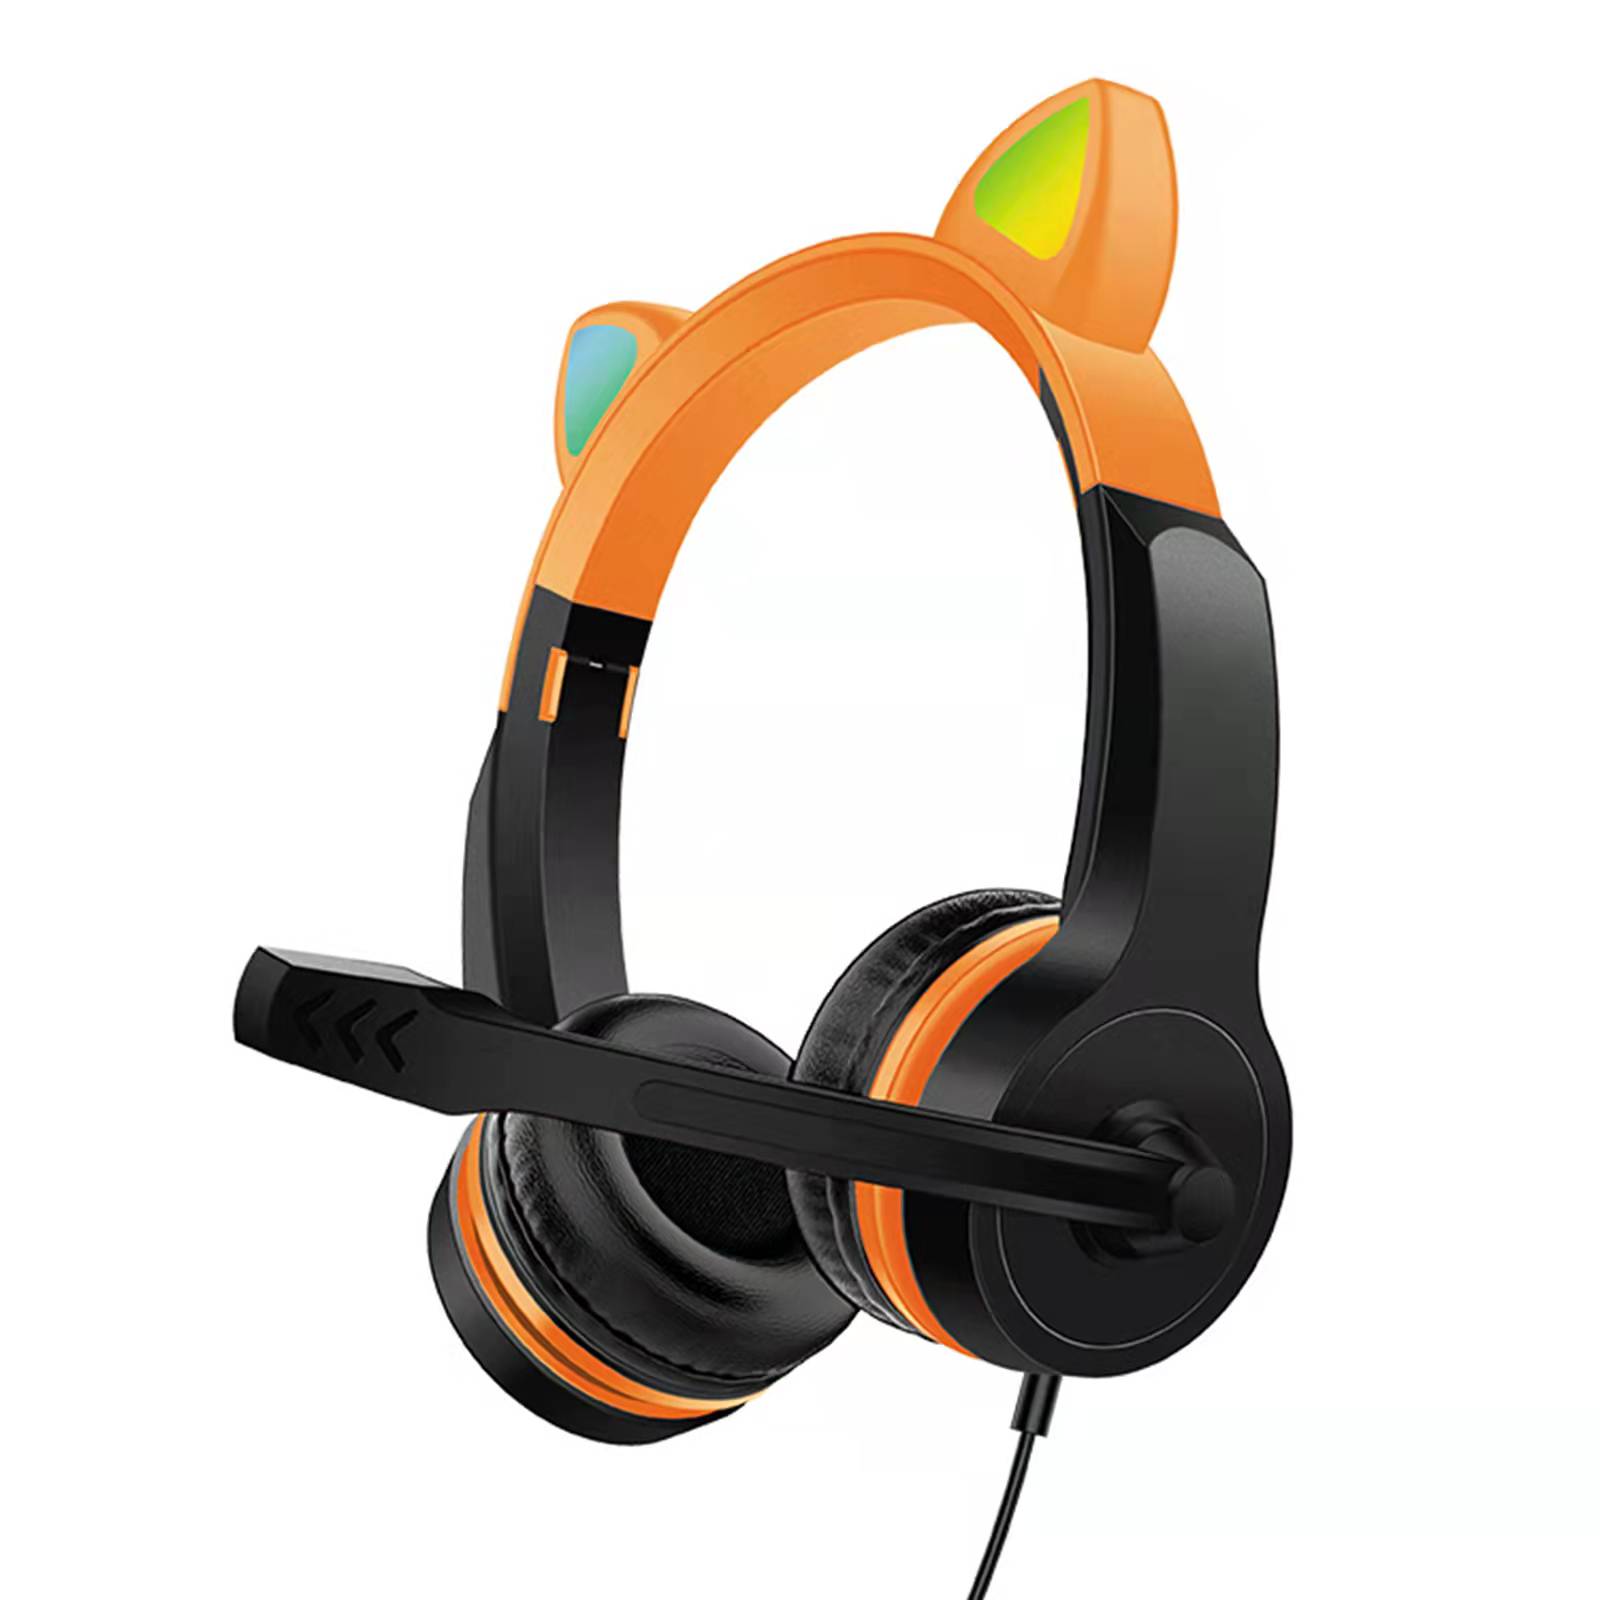 1Over head Headphones Cat ear Headphones Wired with Colorful Design